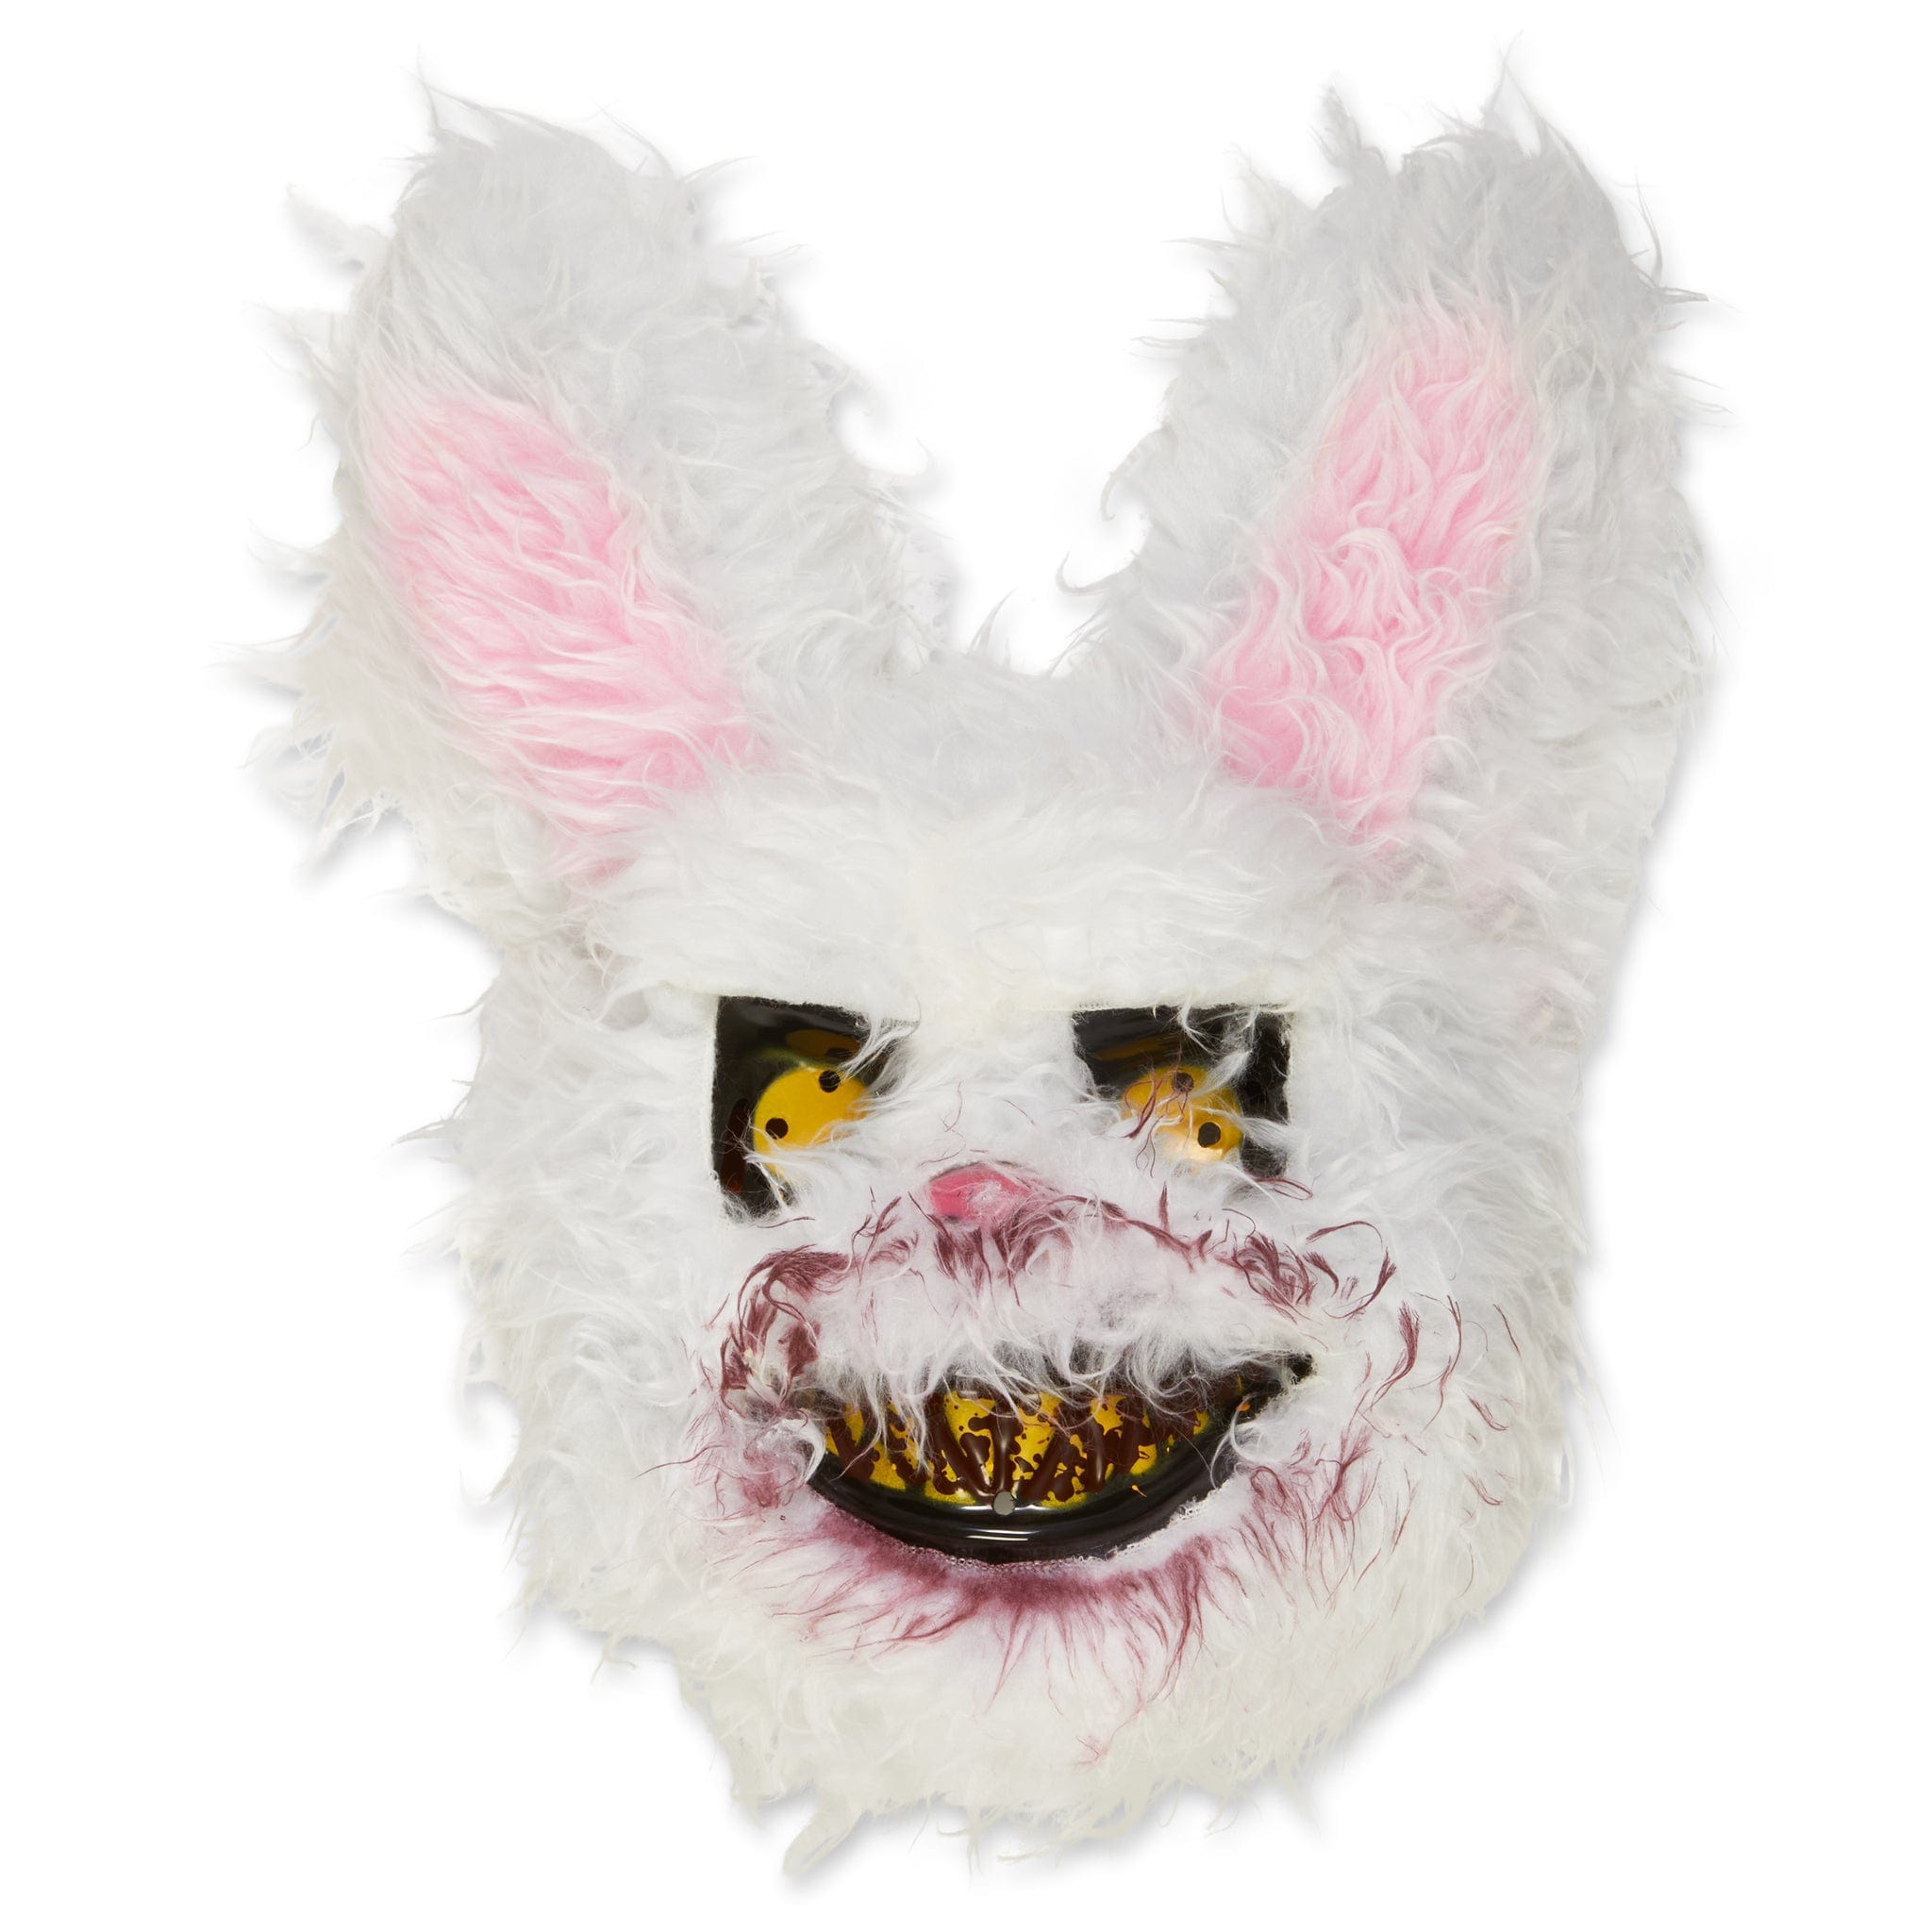 Halloween Scary Rabbit Mask 8718964095056 only5pounds-com